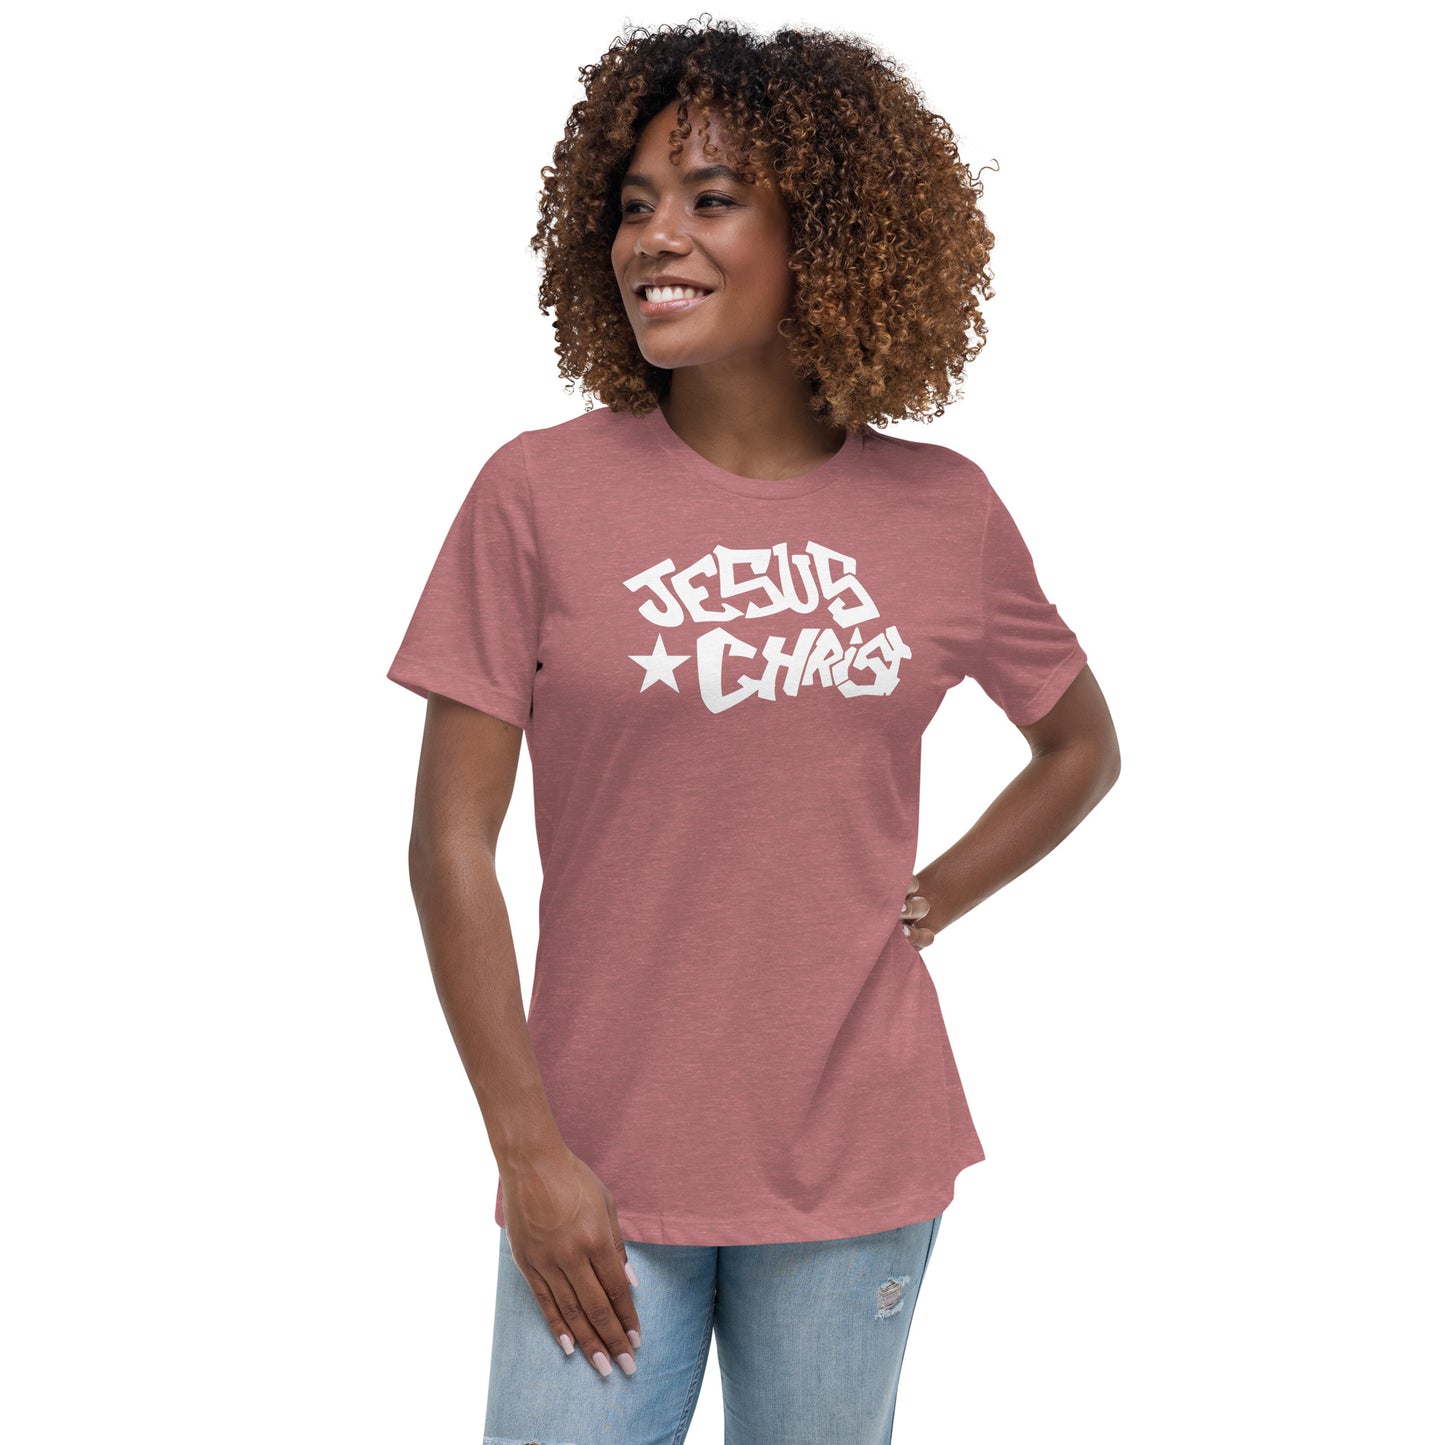 Women's JESUS CHRIST Relaxed Fit Tee